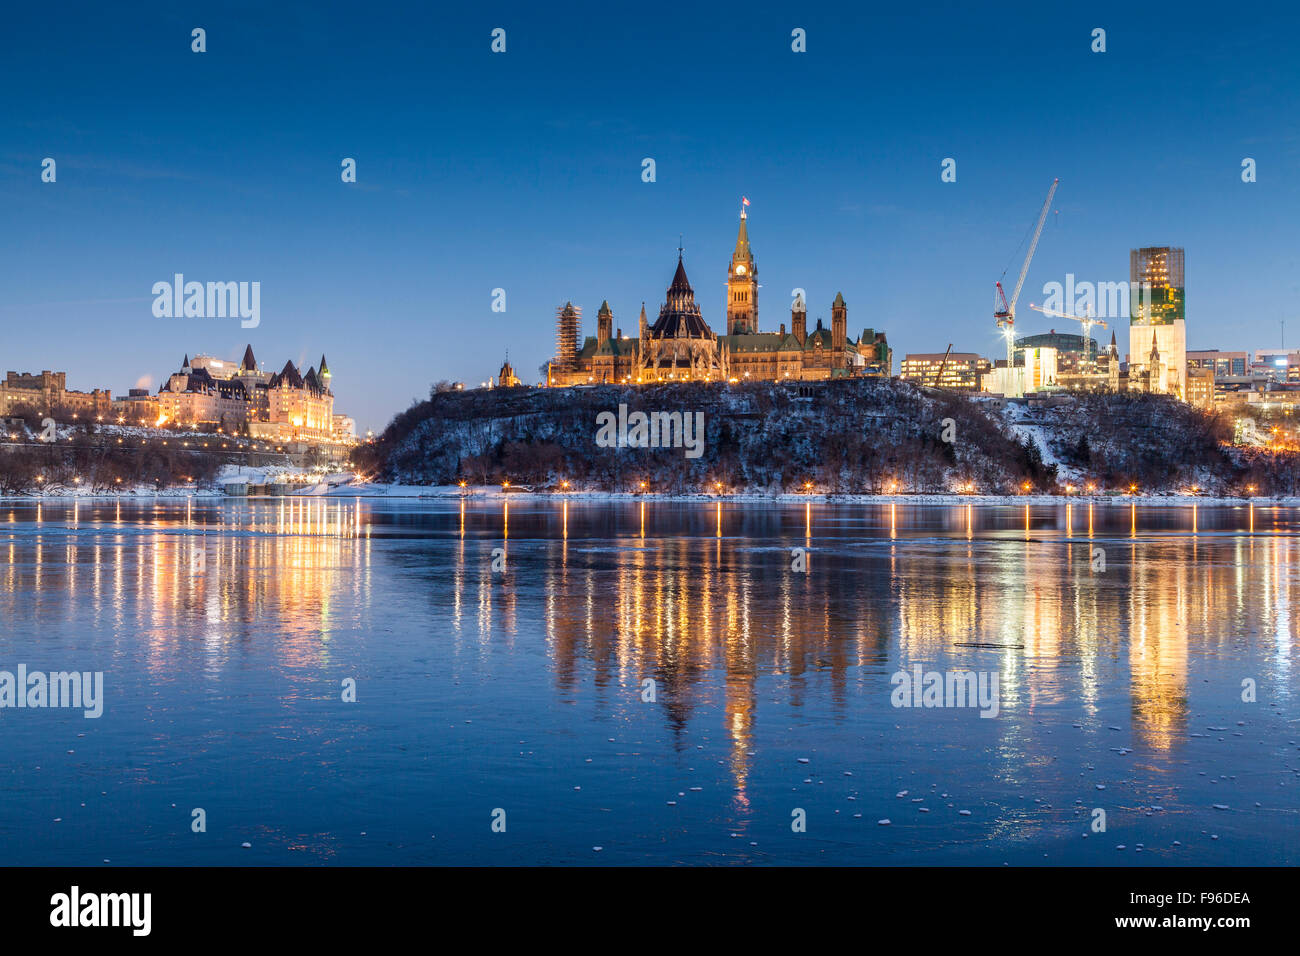 Parliament Hill on the banks of the Ottawa River as seen from Gatineau, Quebec, Canada Stock Photo